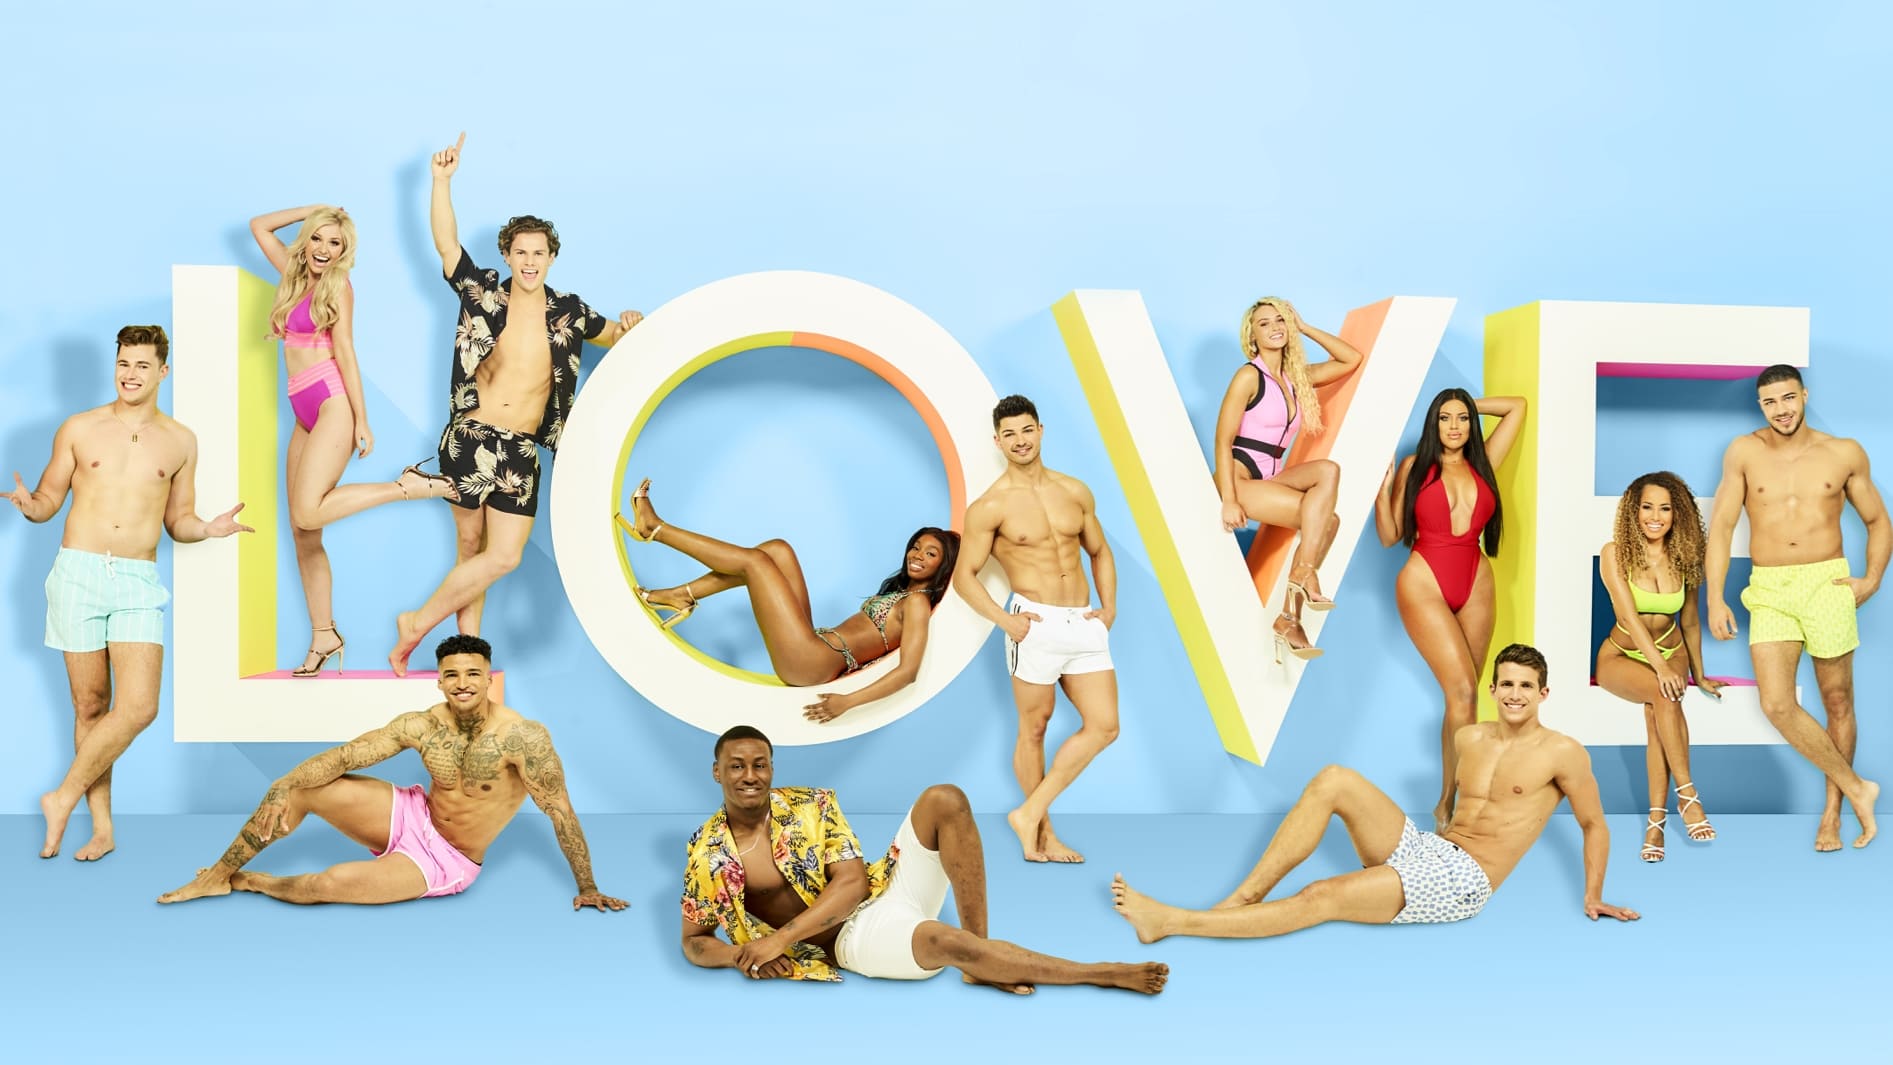 Mark Your Calendars: The Love Island Airing Schedule And Frequency.